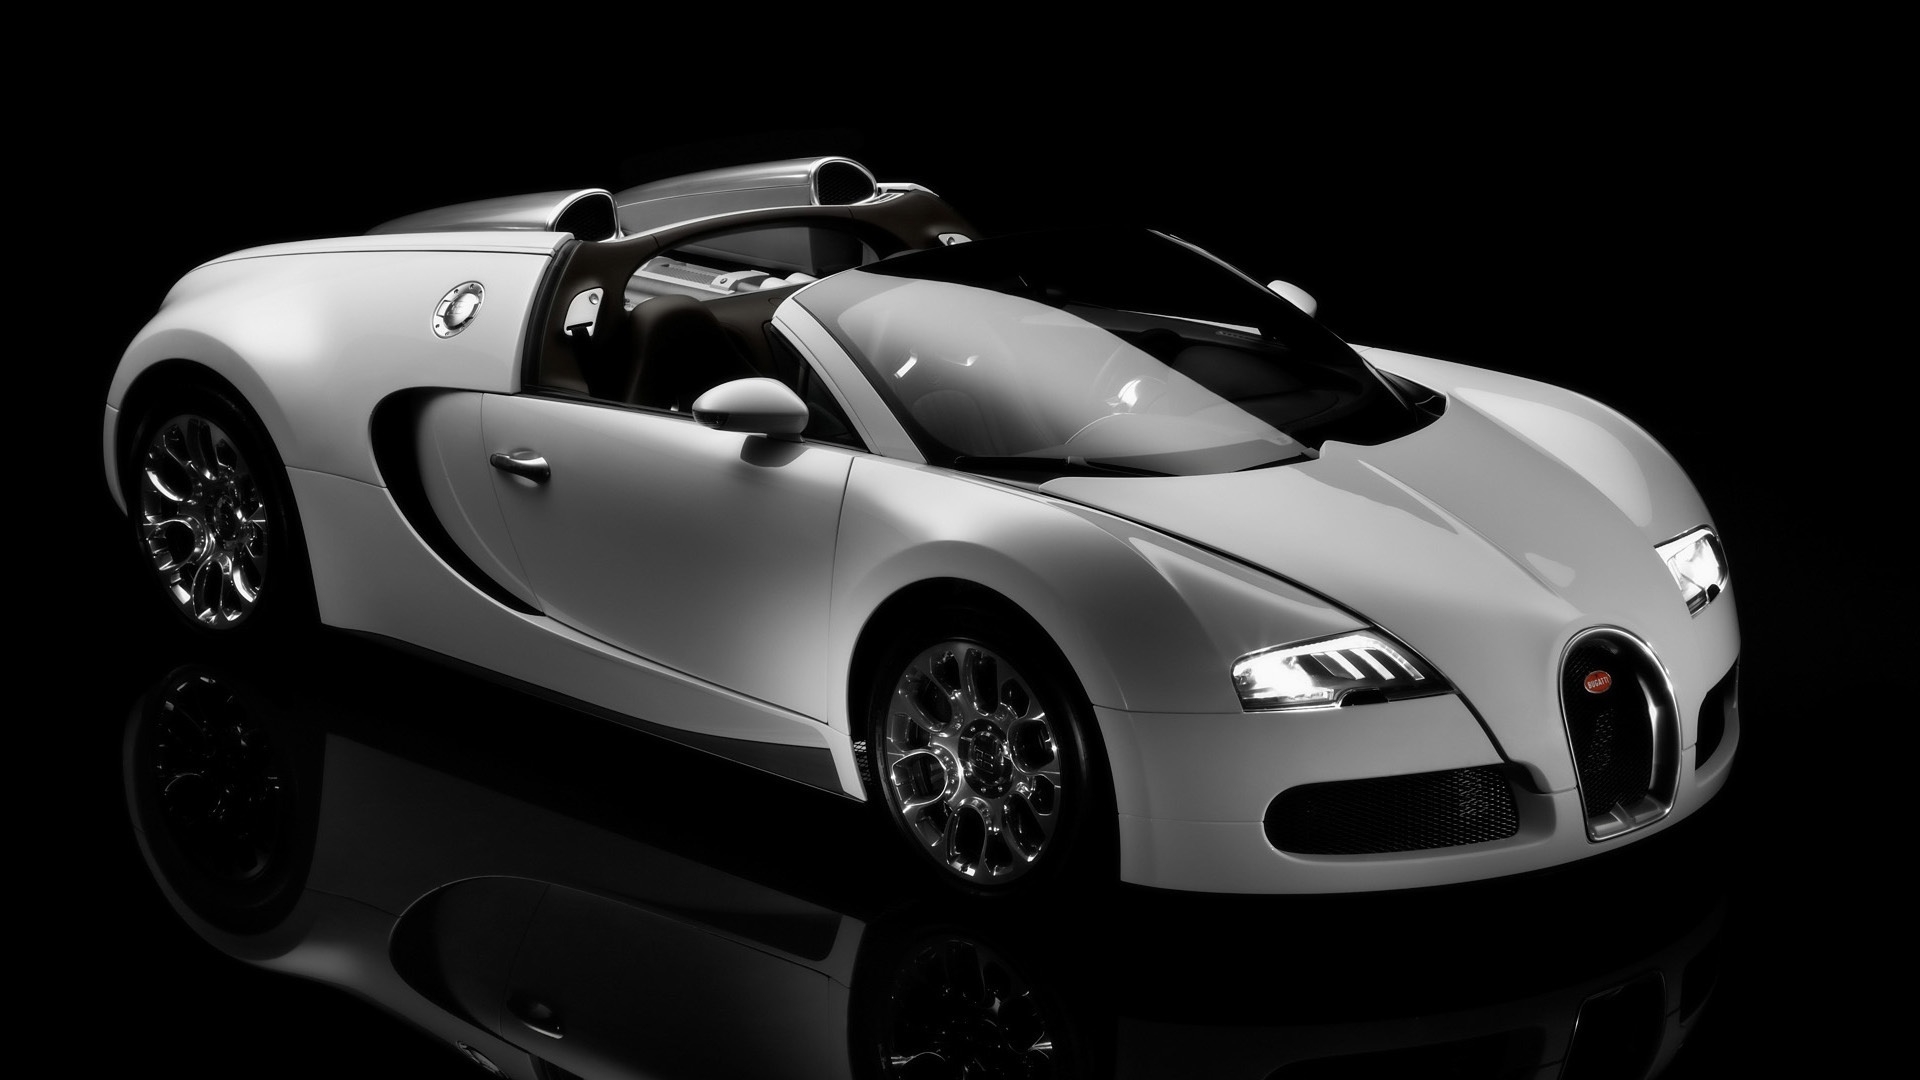 Bugatti Veyron 16.4 Grand Sport Production 2009 - Studio Front And Side for 1920 x 1080 HDTV 1080p resolution